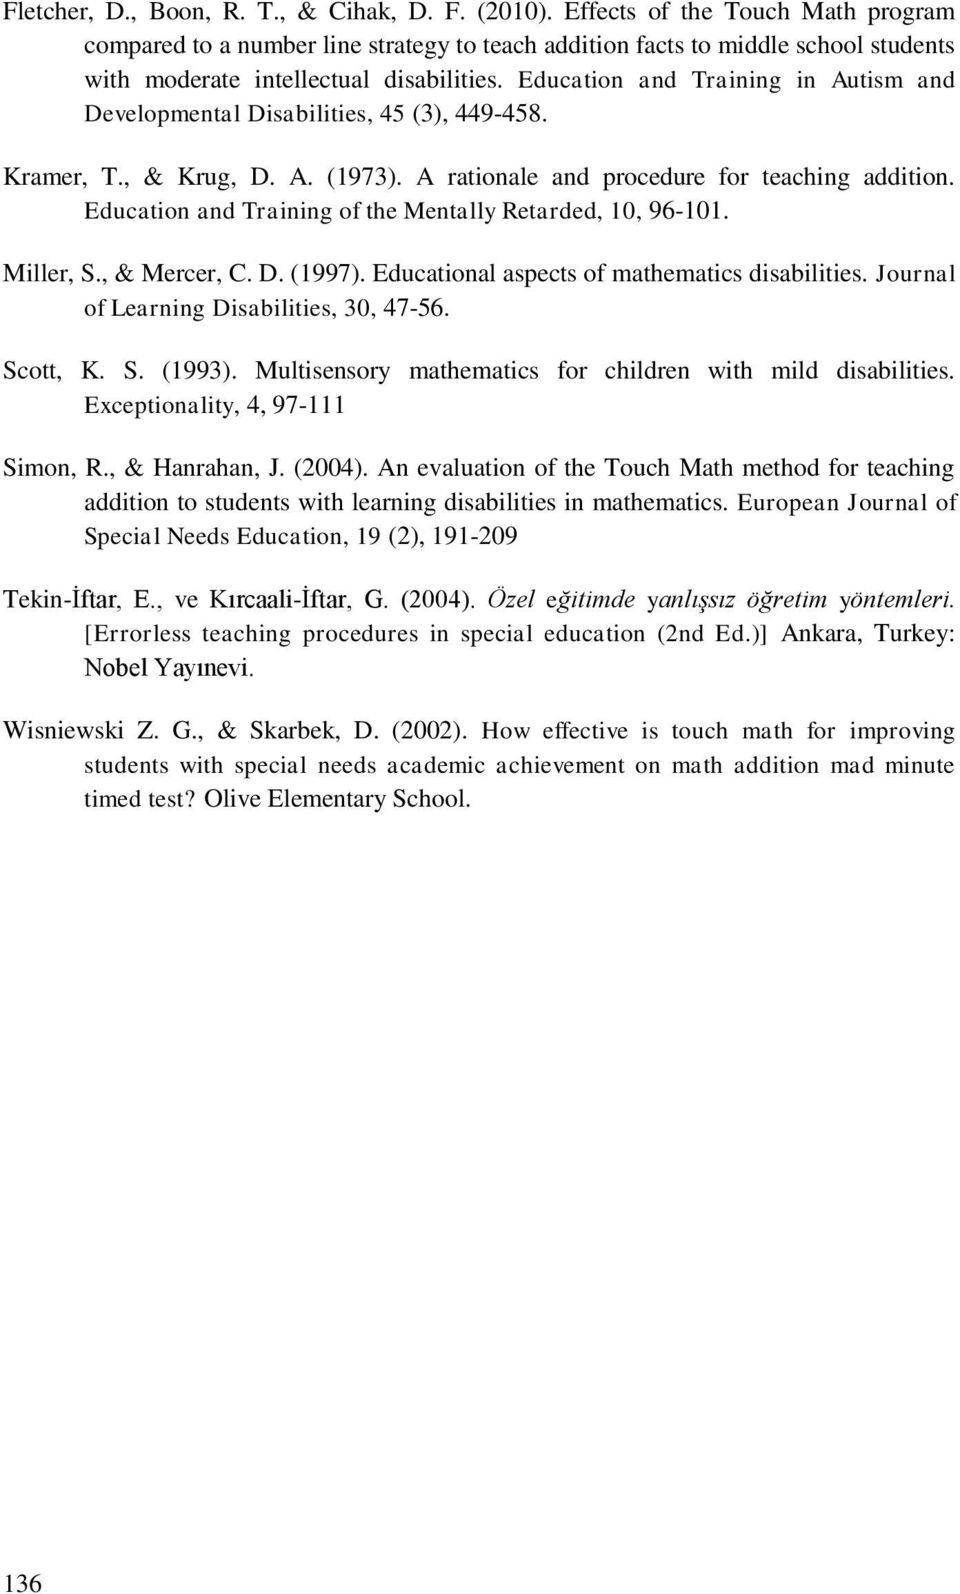 Education and Training in Autism and Developmental Disabilities, 45 (3), 449-458. Kramer, T., & Krug, D. A. (1973). A rationale and procedure for teaching addition.